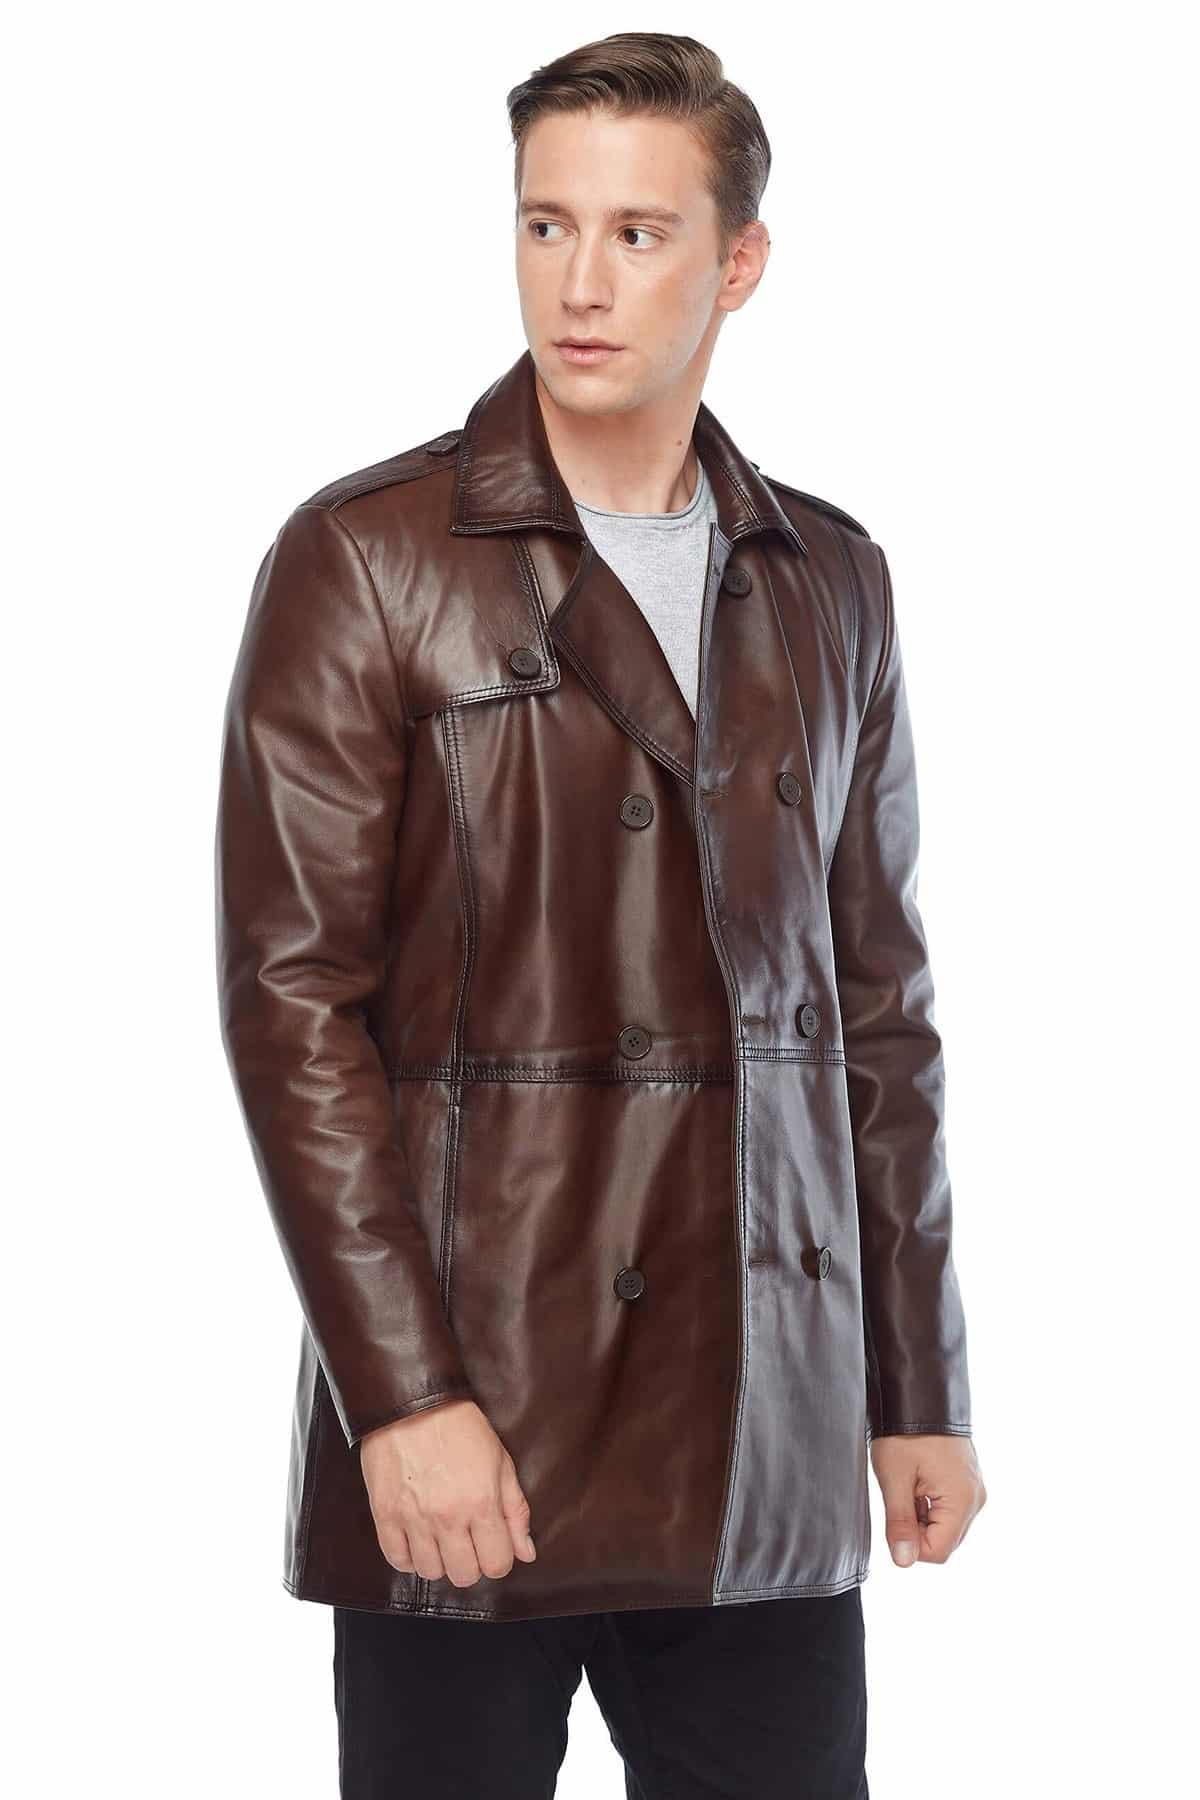 Antonio Banderas Real Leather Brown Trench Coat Side